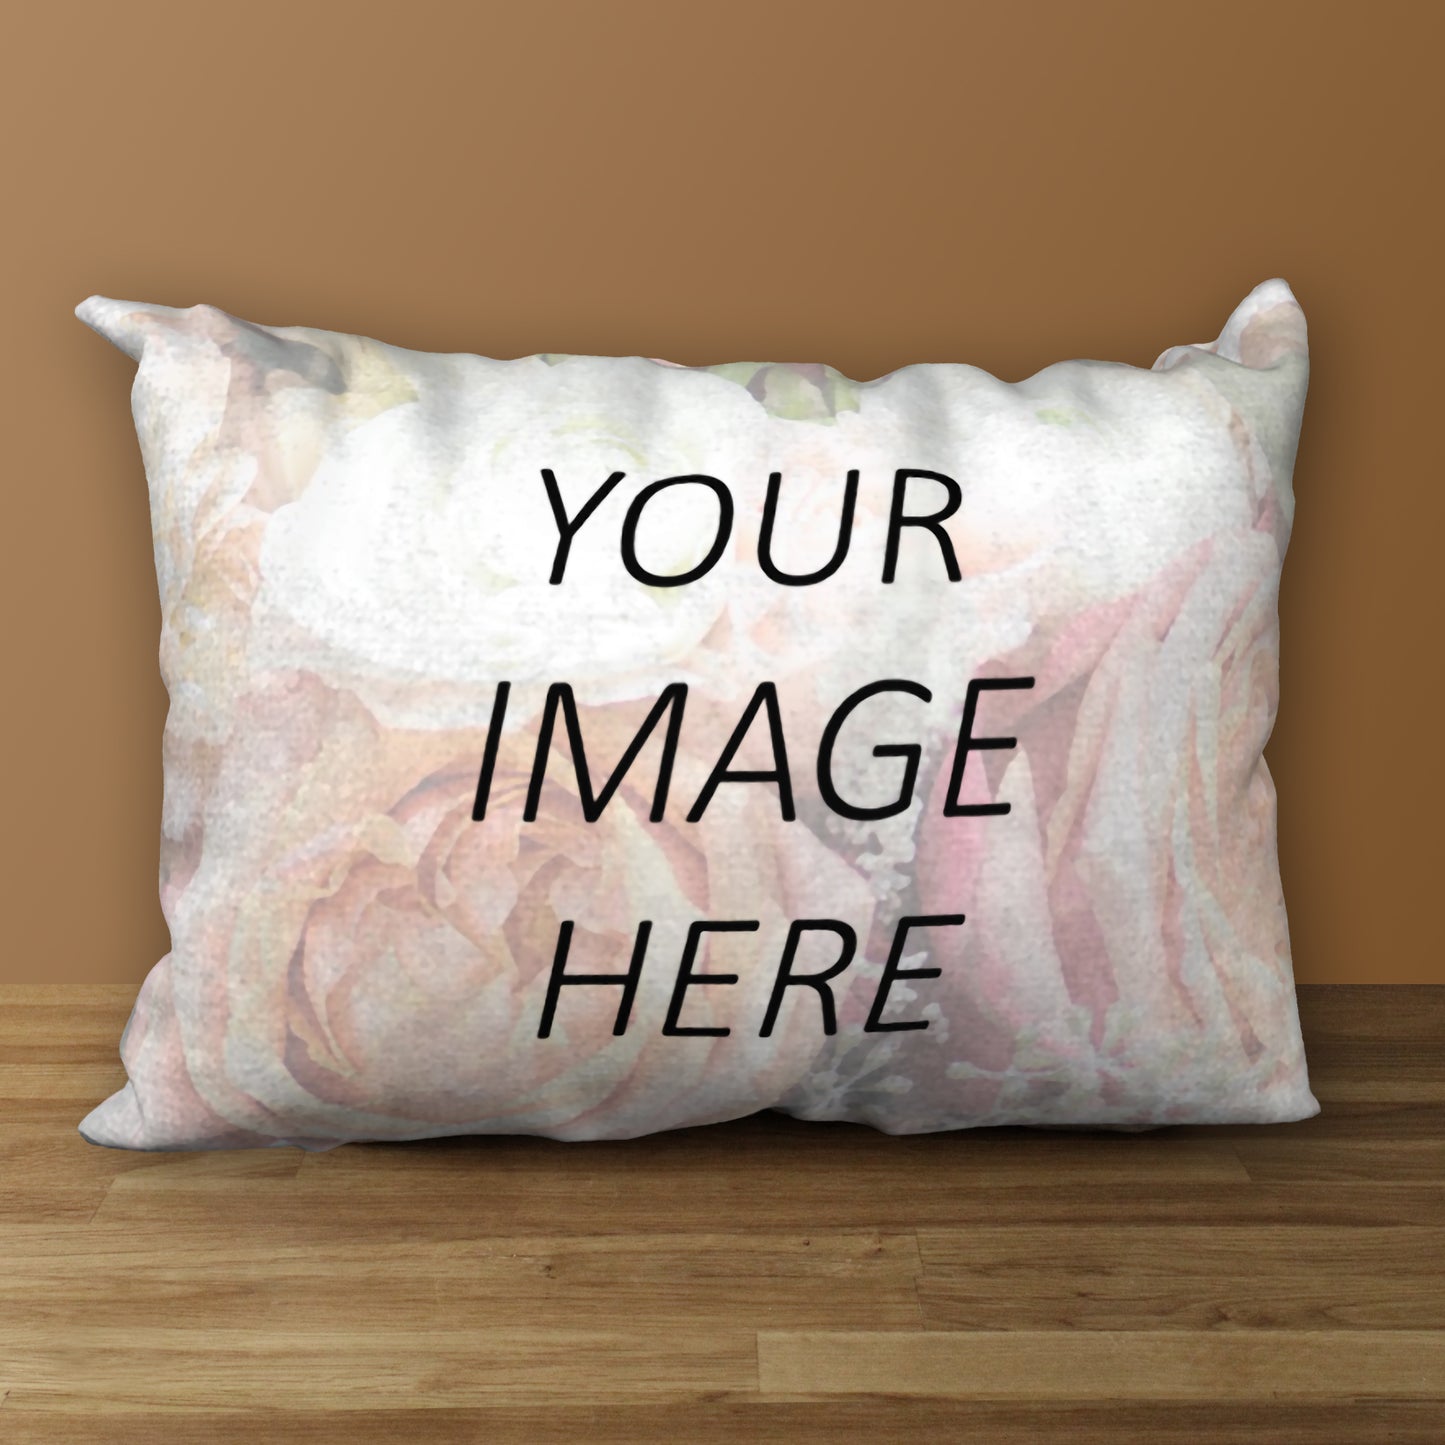 Personalized Photo Pillow Made to Order, 20"x14" or 18"x18"